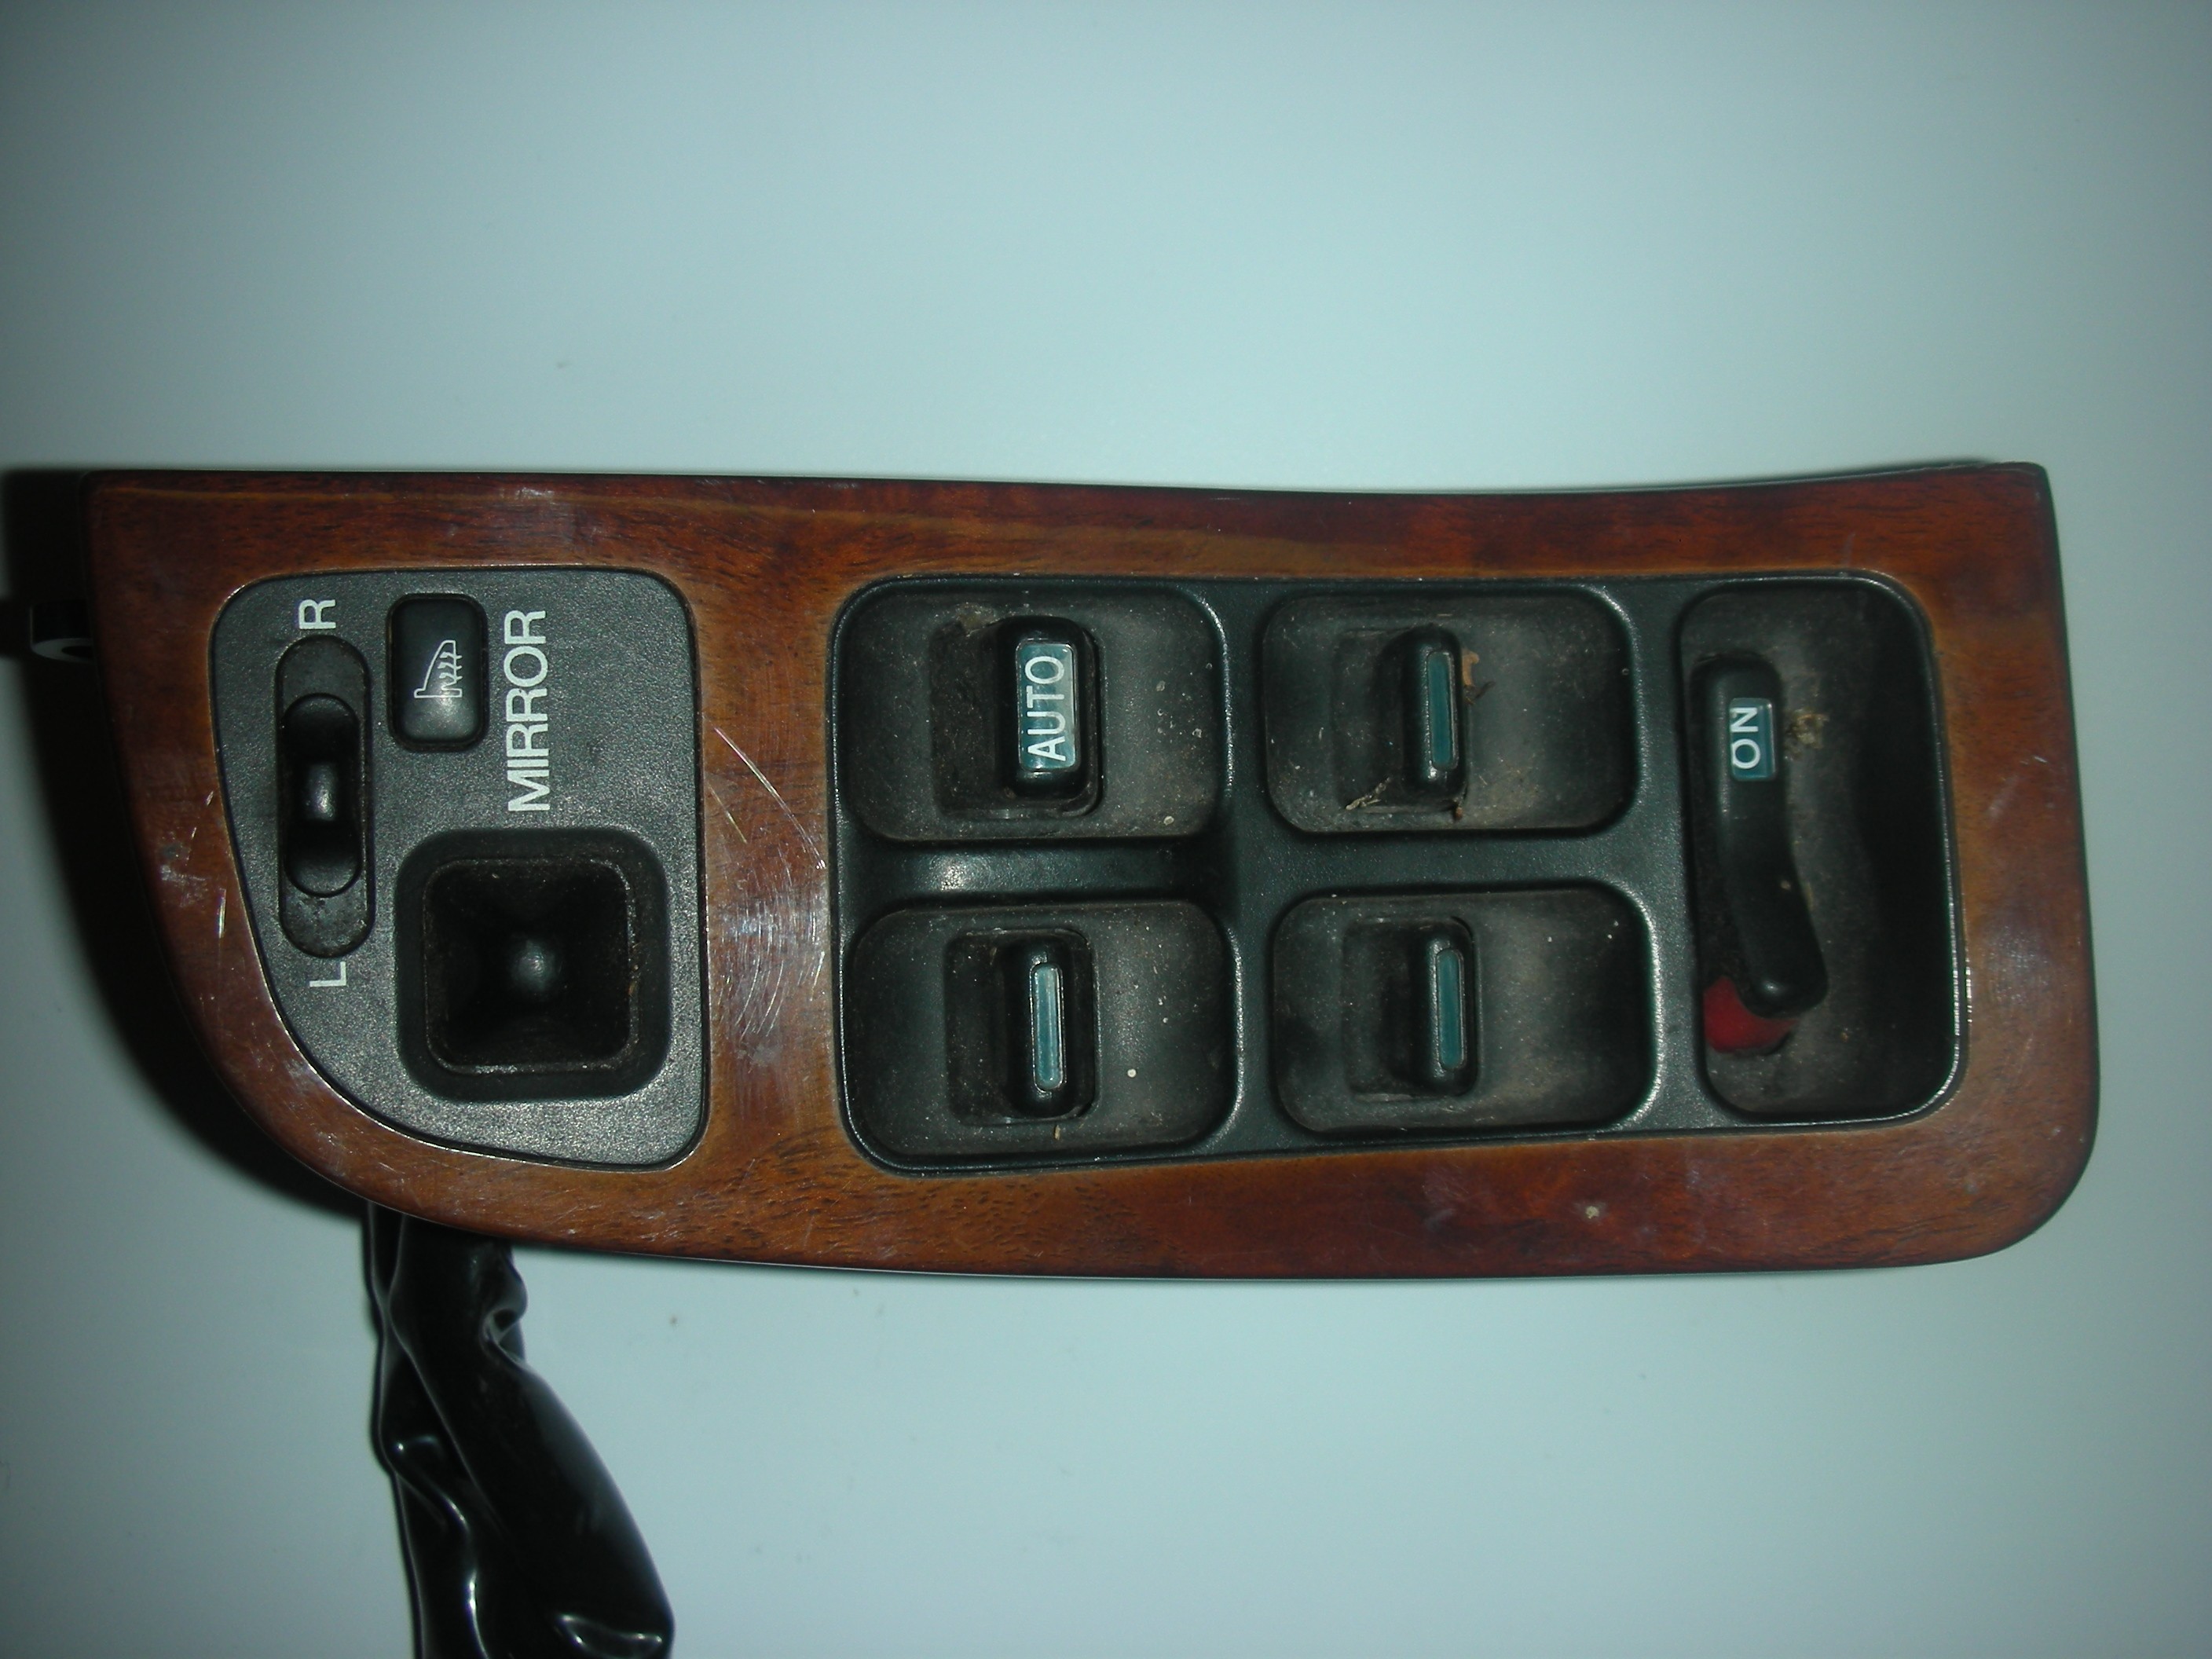 HONDA LEGEND DRIVER SIDE FRONT WINDOW SWITCHES 1993-1994.